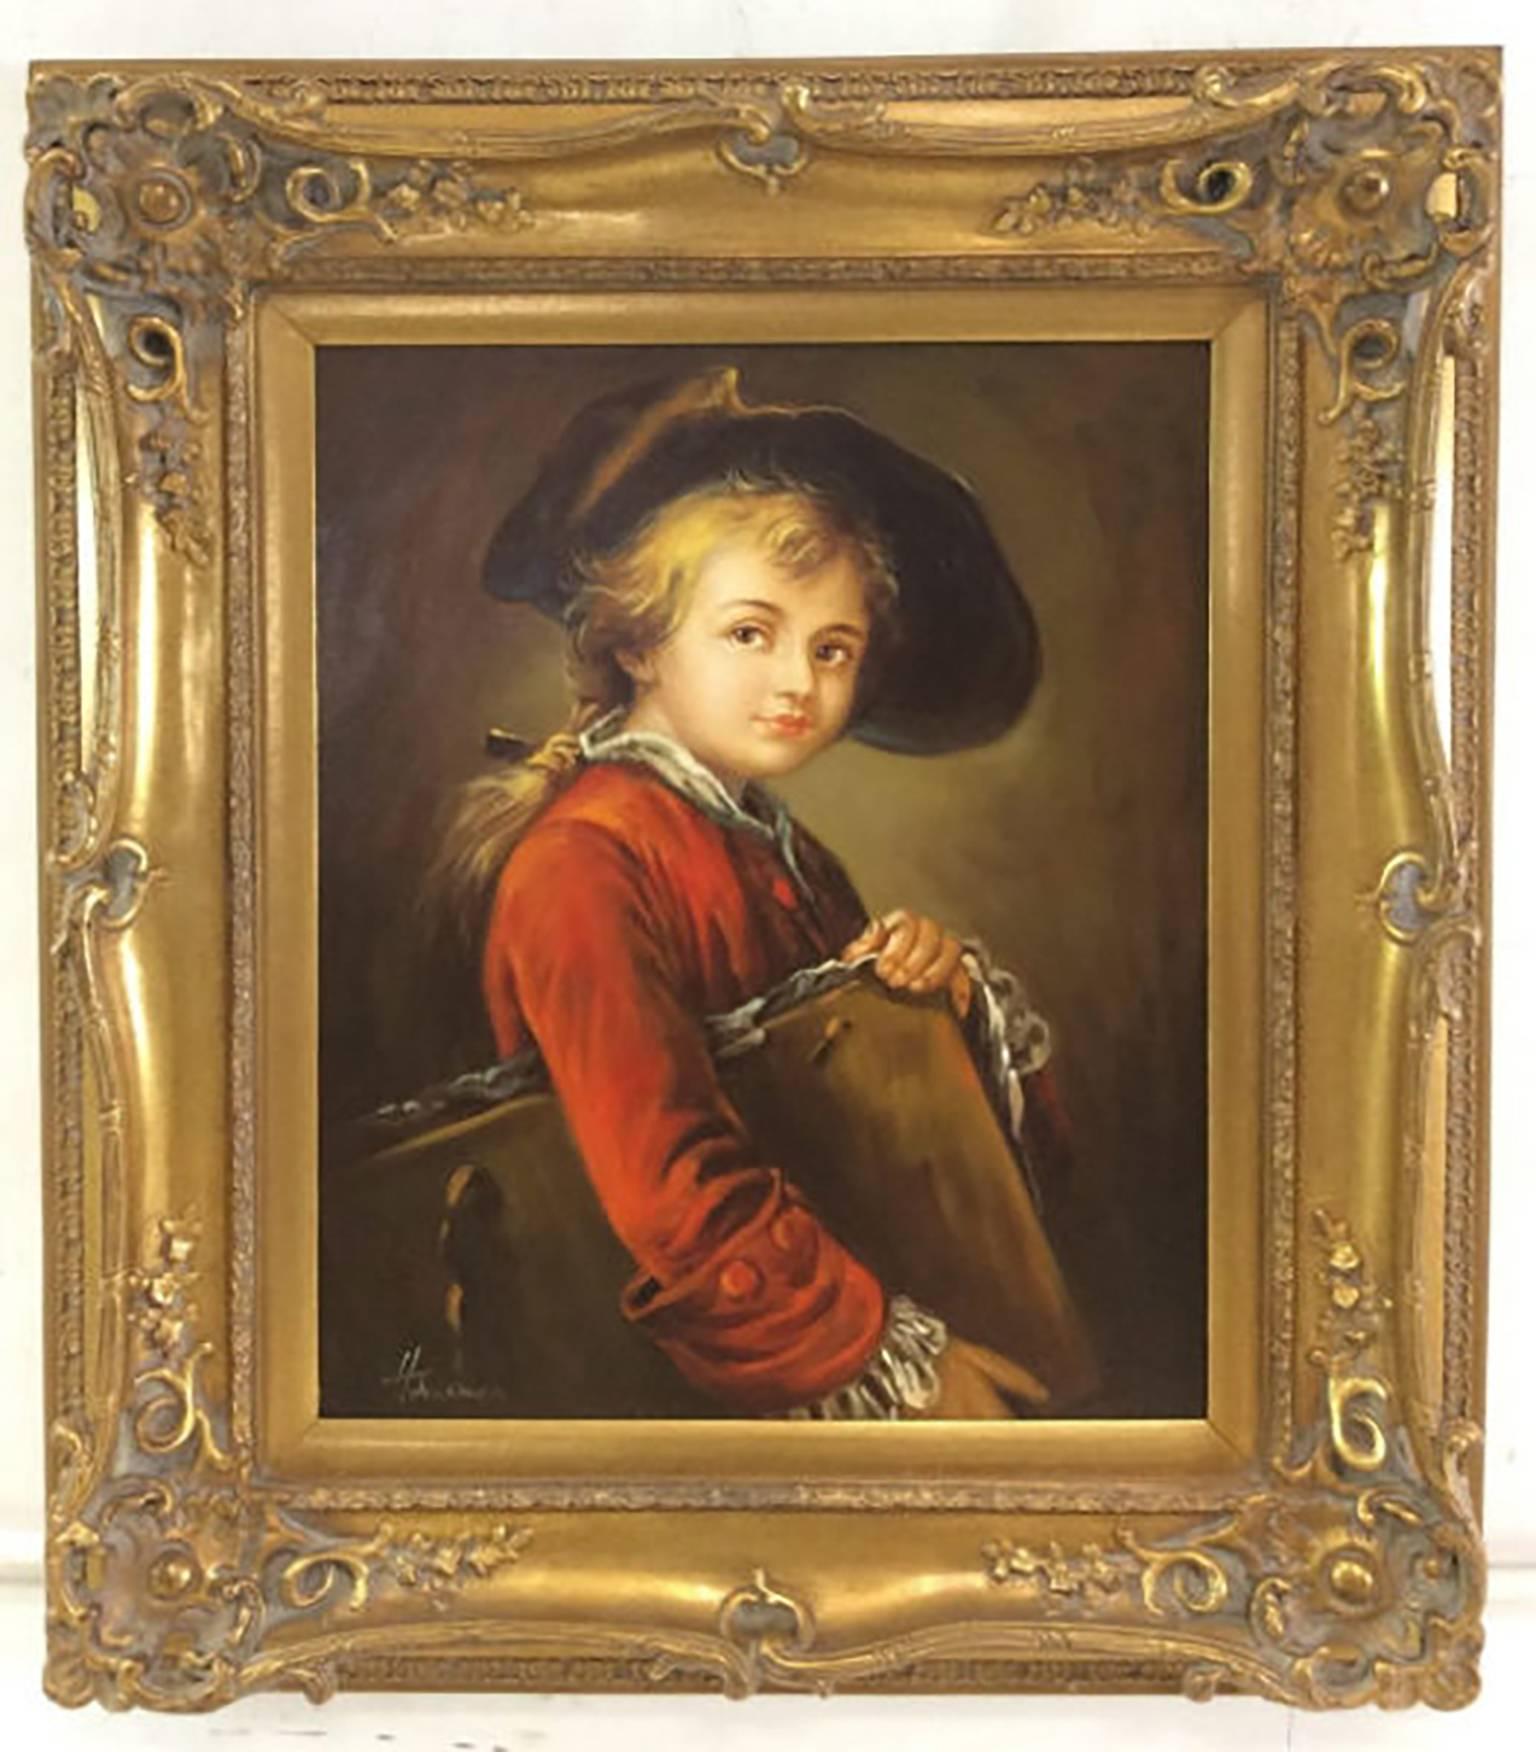 Portrait Oil After Nicolas Bernard Lepicie Entitled “The Young Draughtsman” - Painting by (After) Nicolas Bernard Lepicie